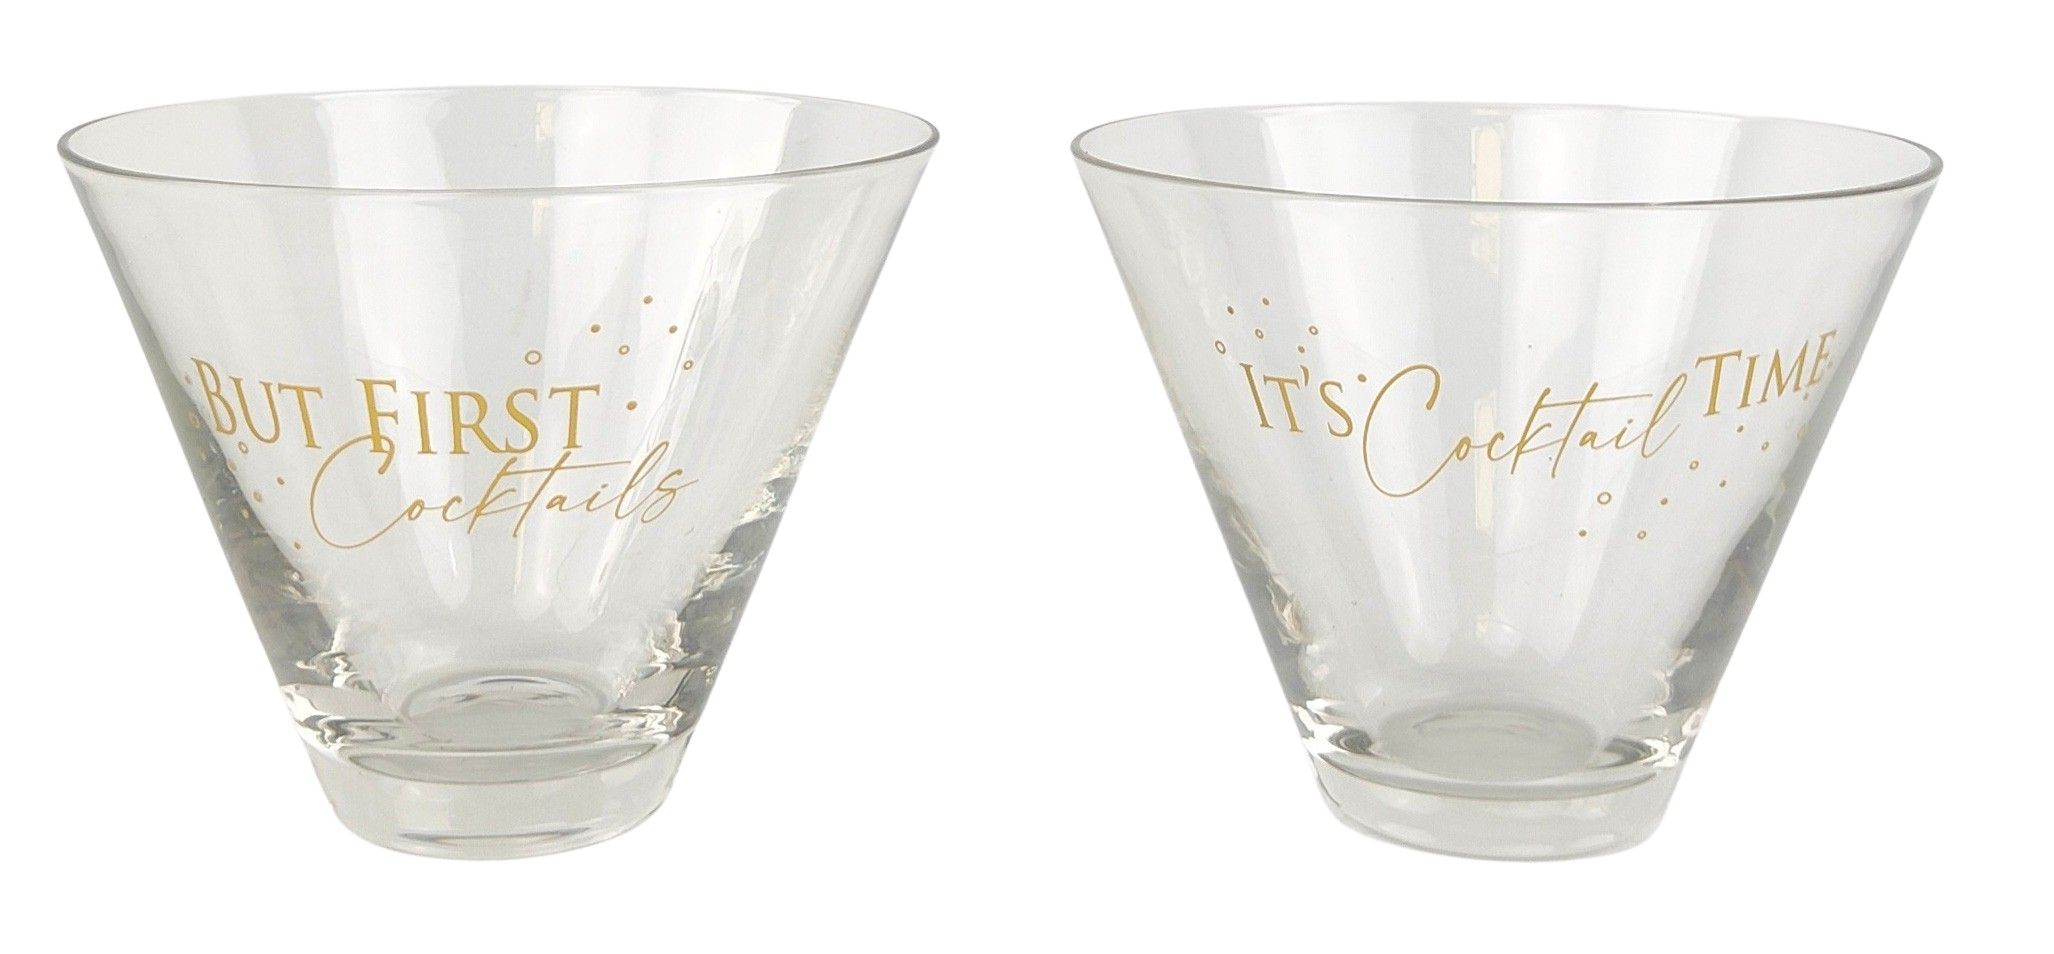 It's Cocktail Time Cocktail Glass | Set of 2